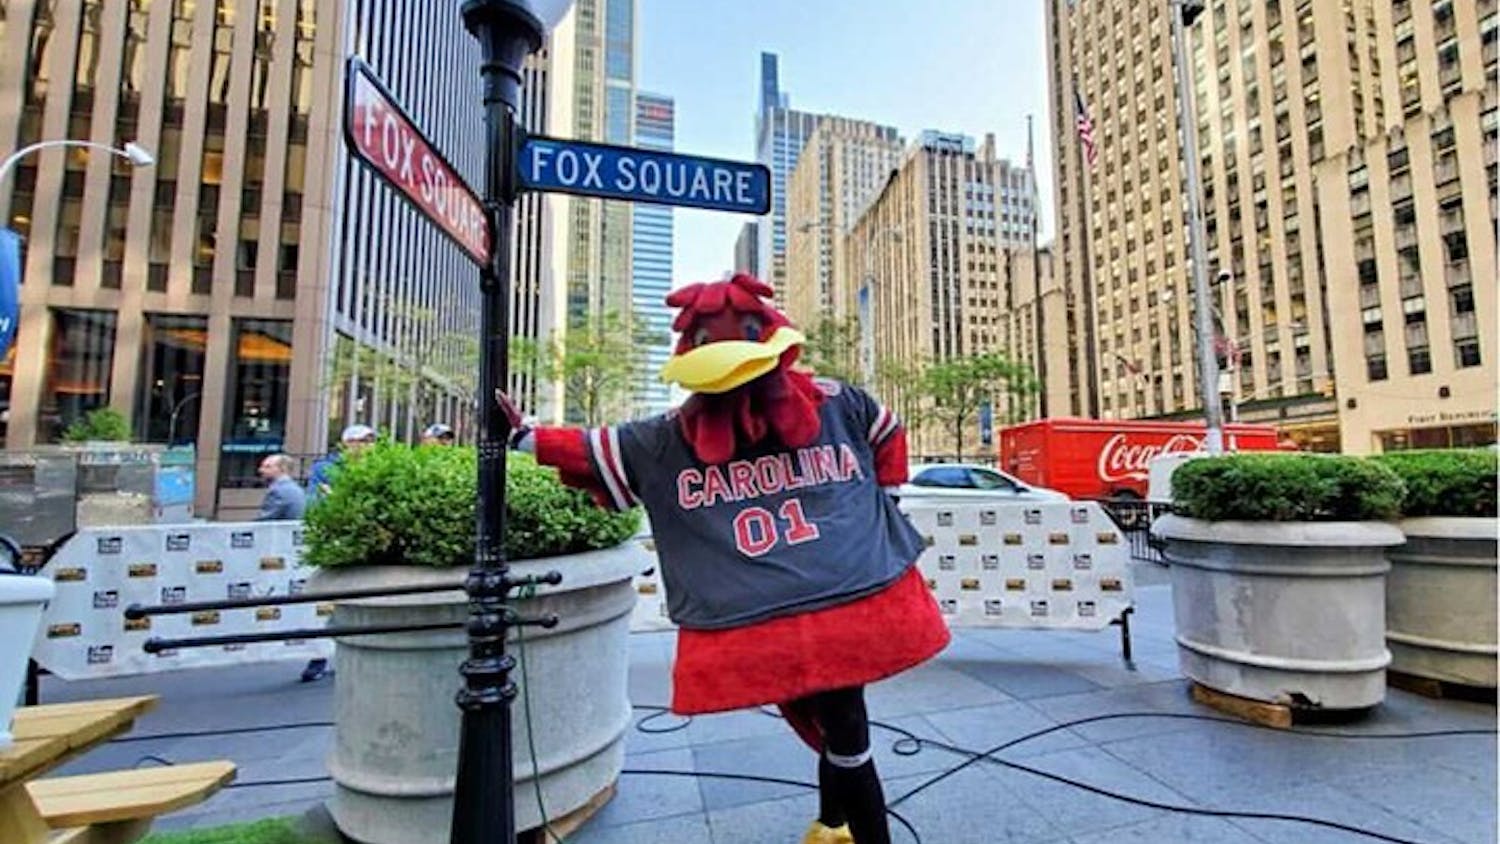 Cocky leaning up against the Fox Square sign outside of the Fox Network studios.